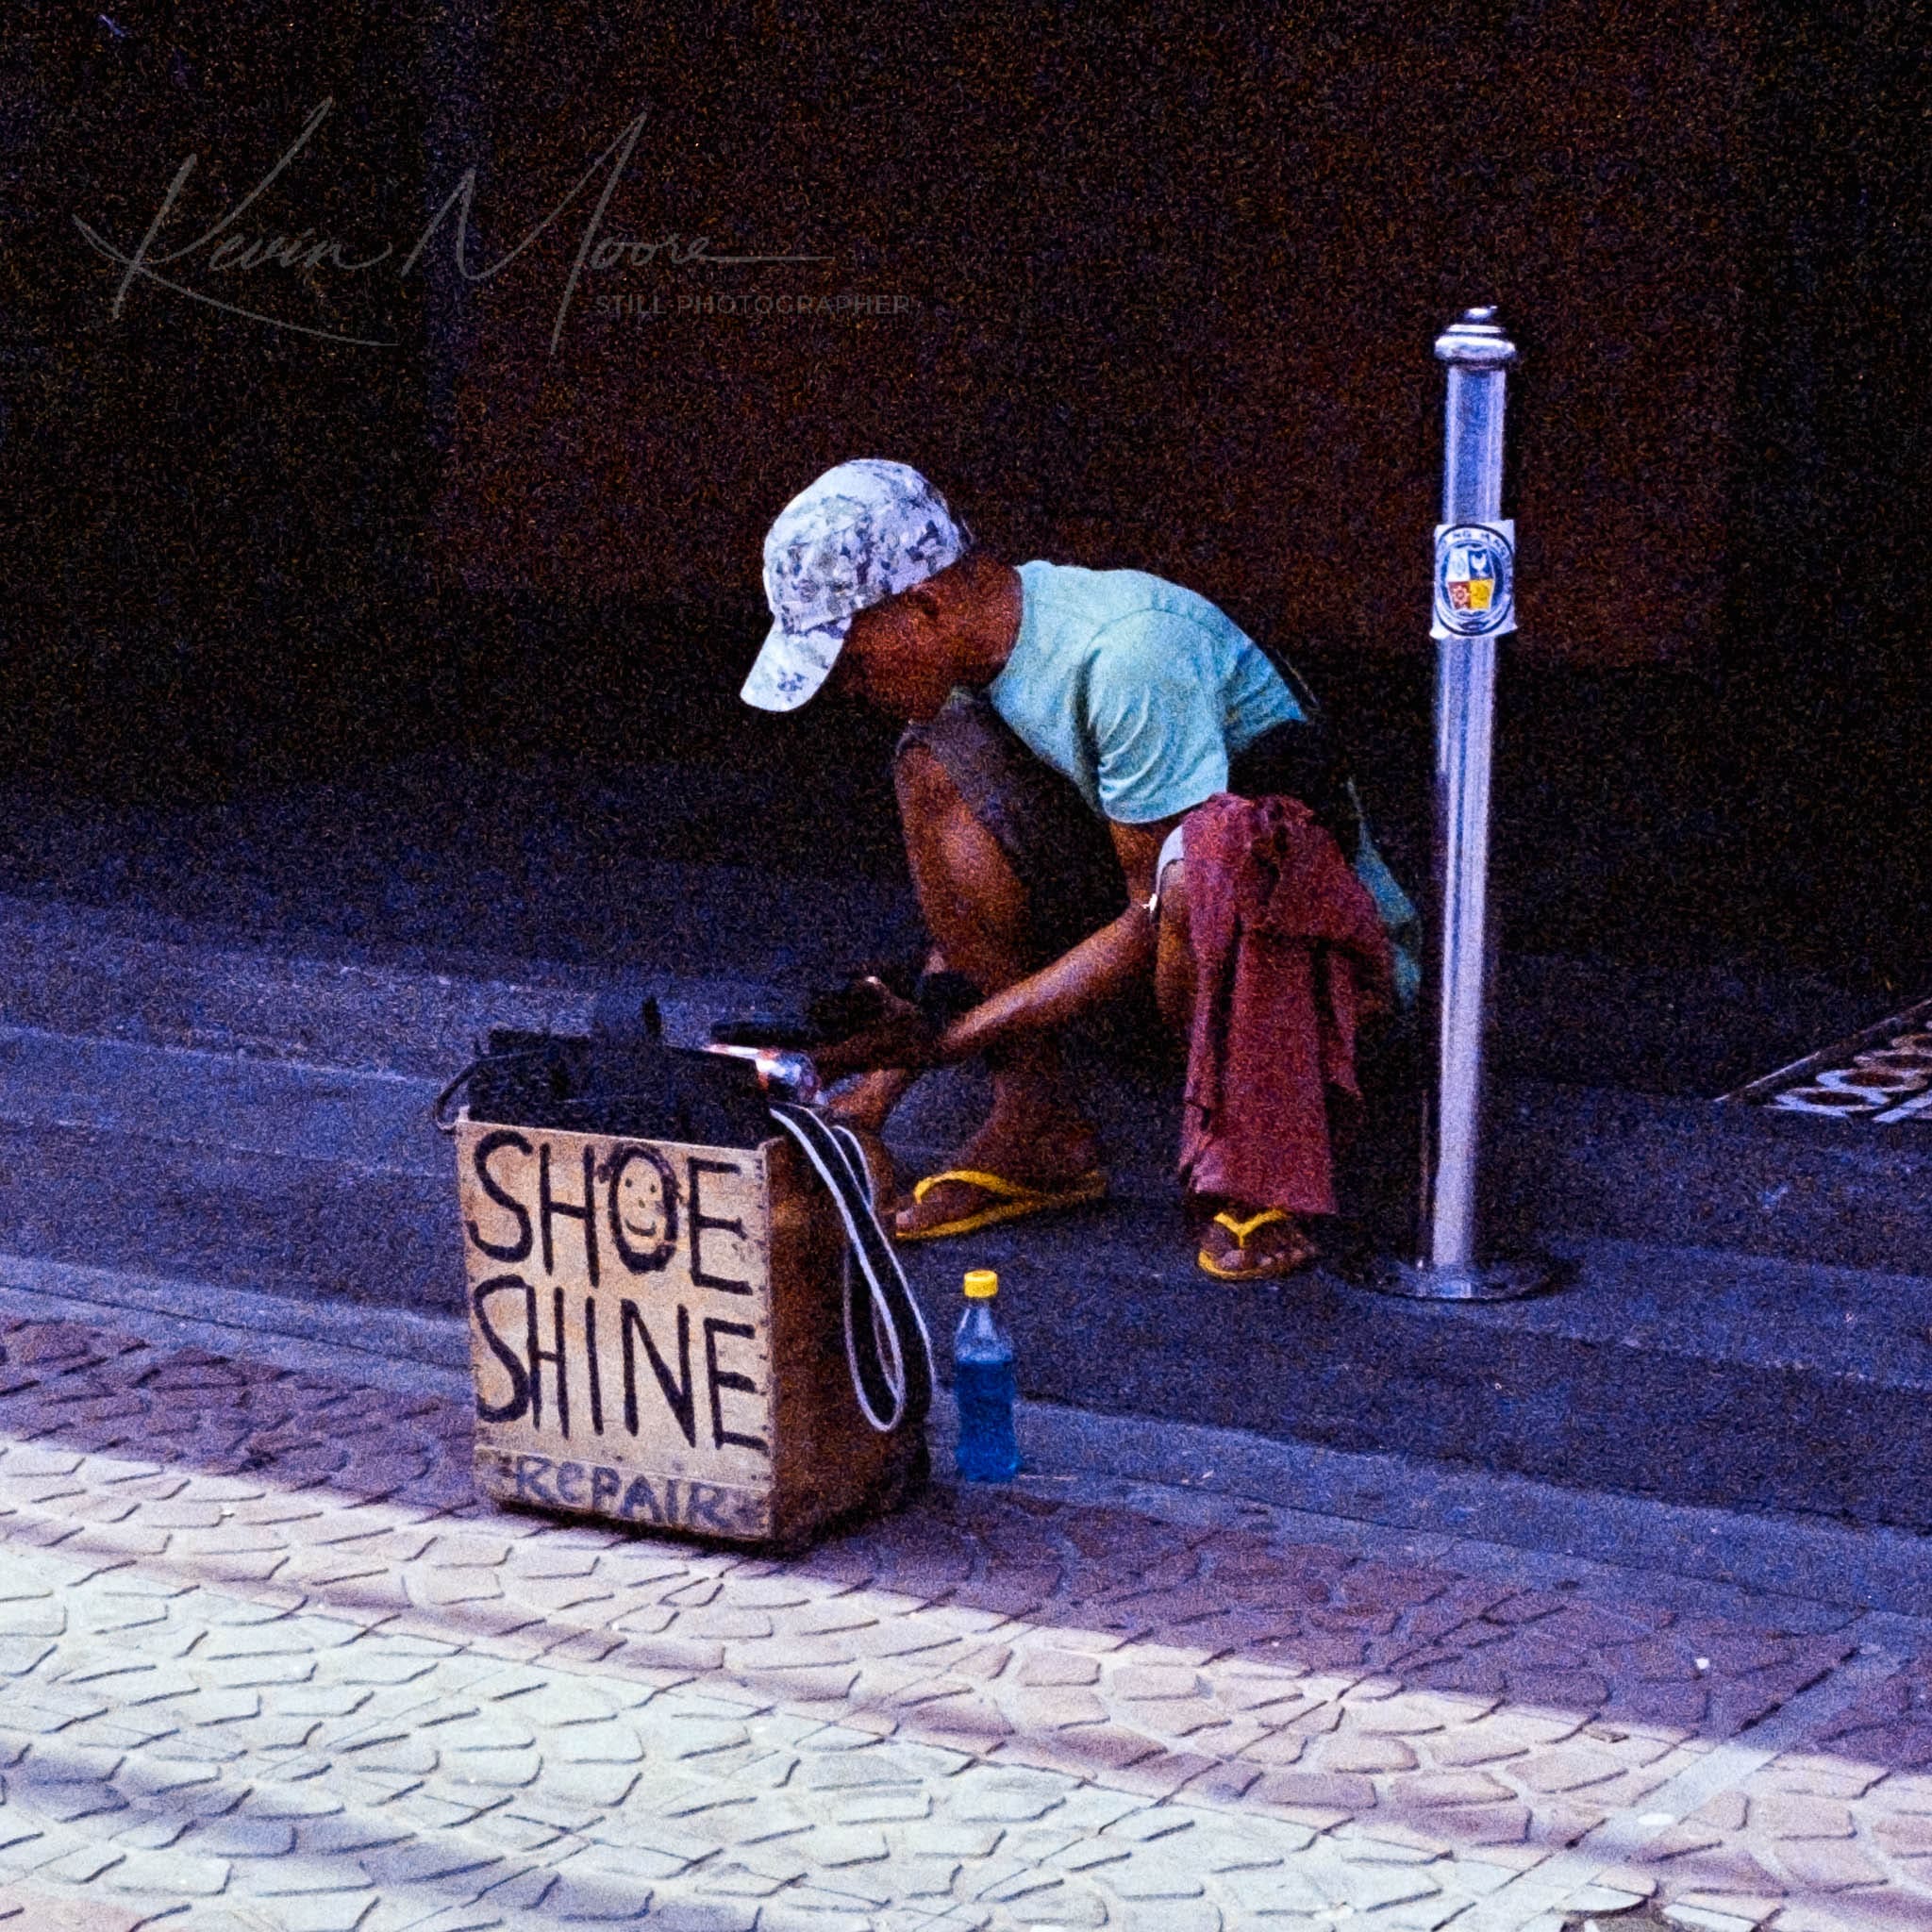 Street shoe shiner in casual attire preparing for work in a summery urban setting.